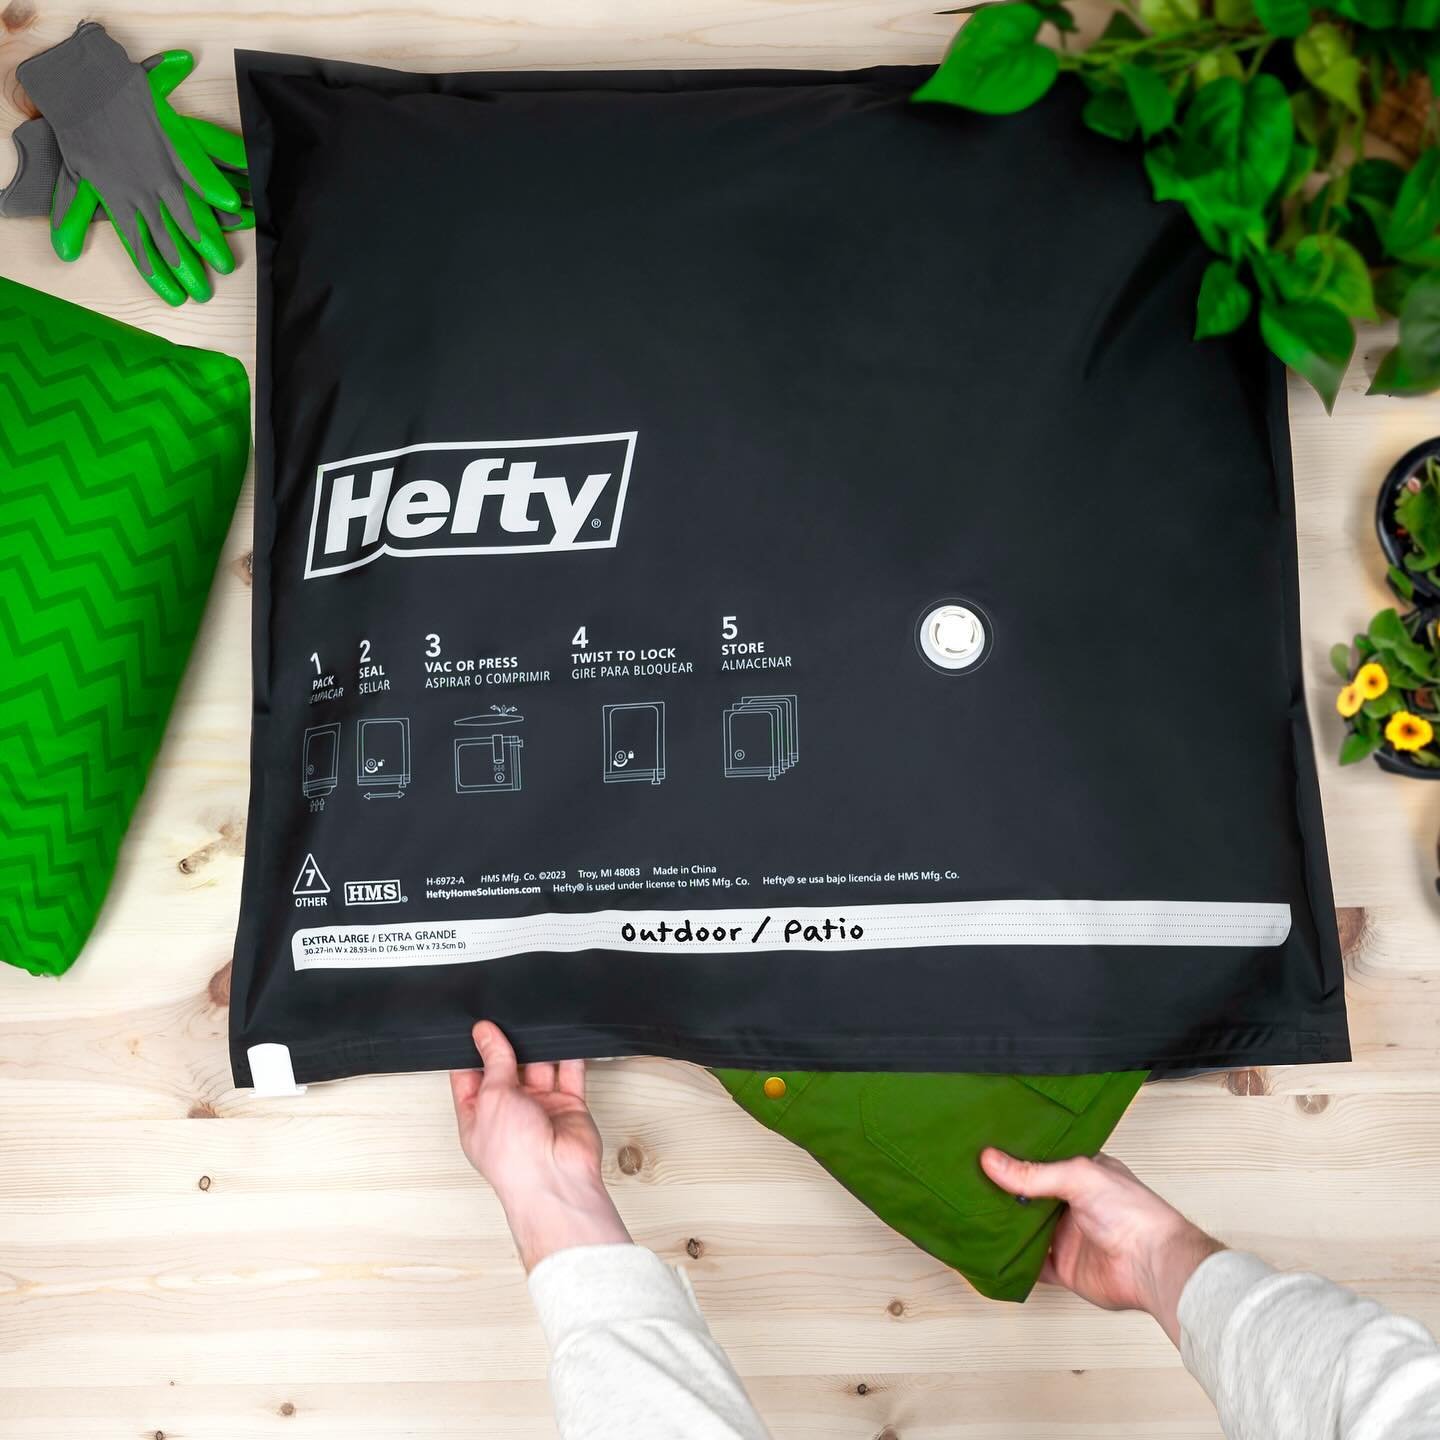 ‼️ NEW ‼️

Introducing the next generation of Hefty&reg; SHRINK-PAK&reg;! These bags are made of innovative polyester material the is puncture and rip resistant. Hide away your out of season clothing, bedding, and camping gear in new SHRINK-PAK&reg; 